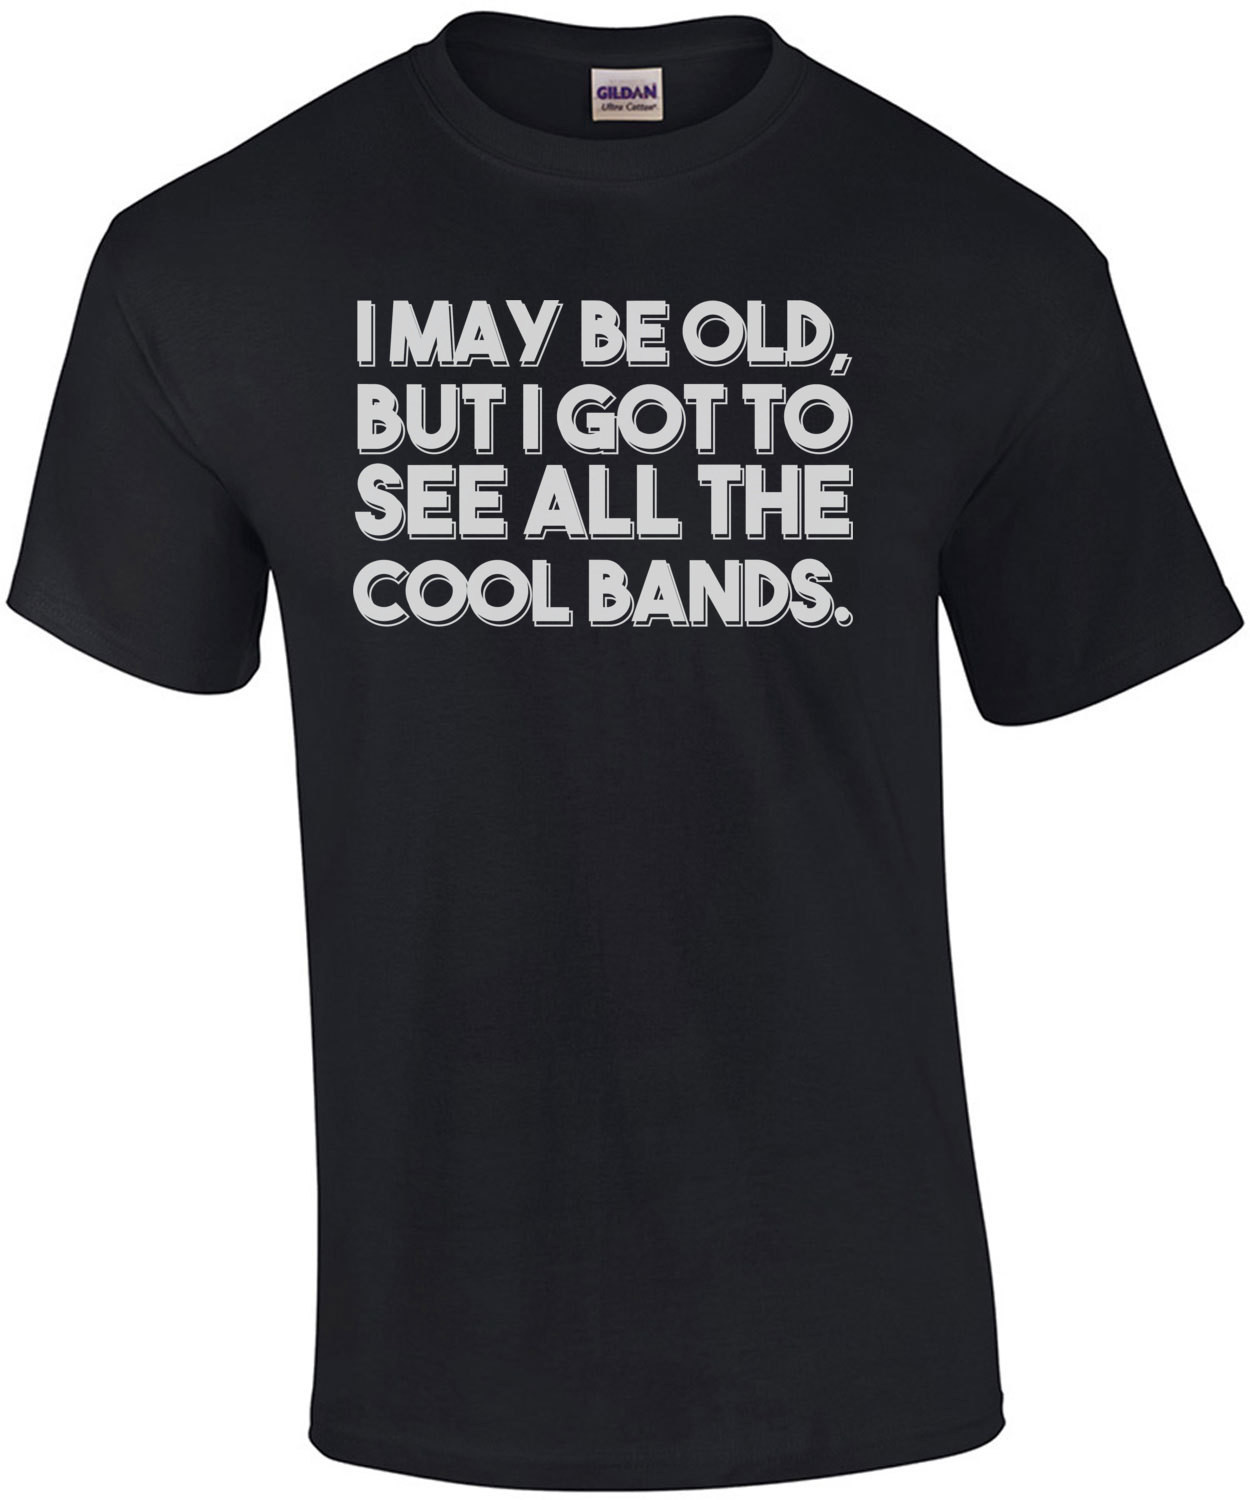 I May Be Old, But I Got To See All The Cool Bands. Funny T-Shirt